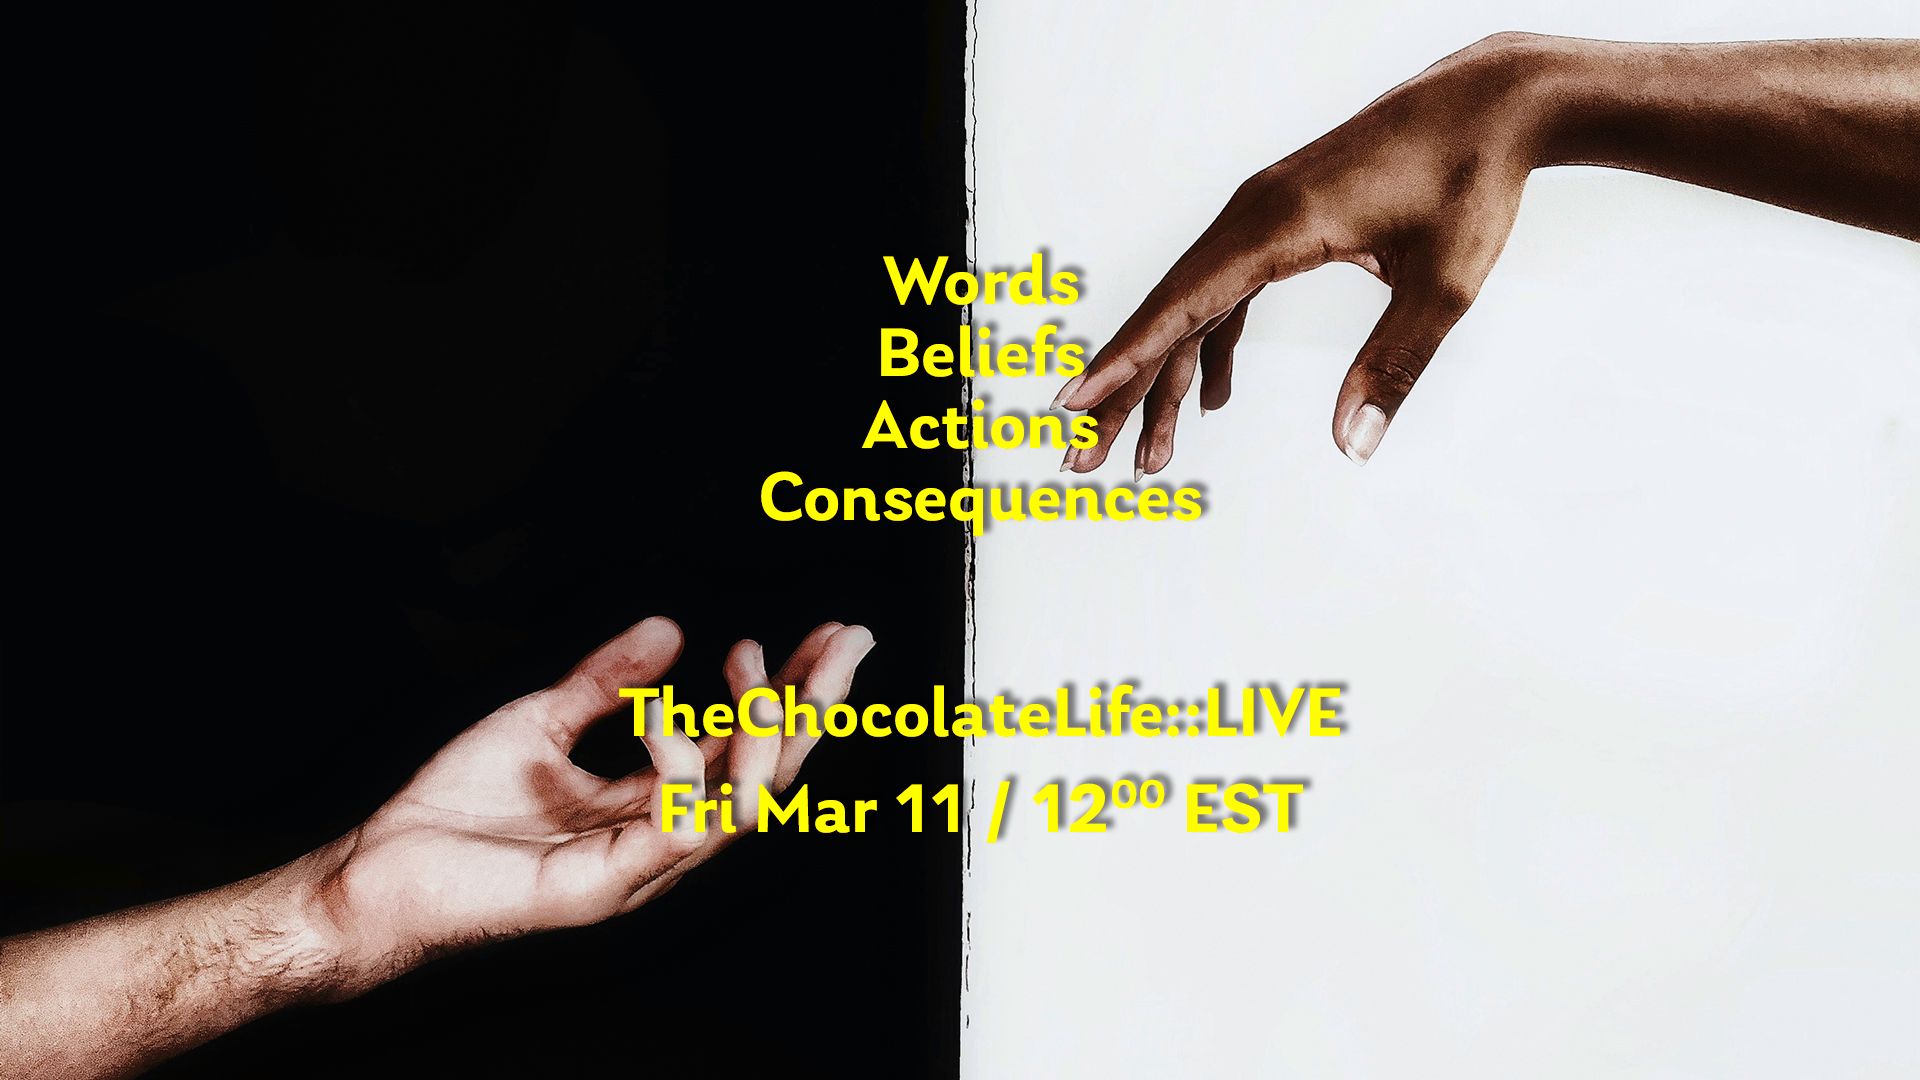 TheChocolateLife::LIVE – Words. Beliefs. Actions. Consequences.